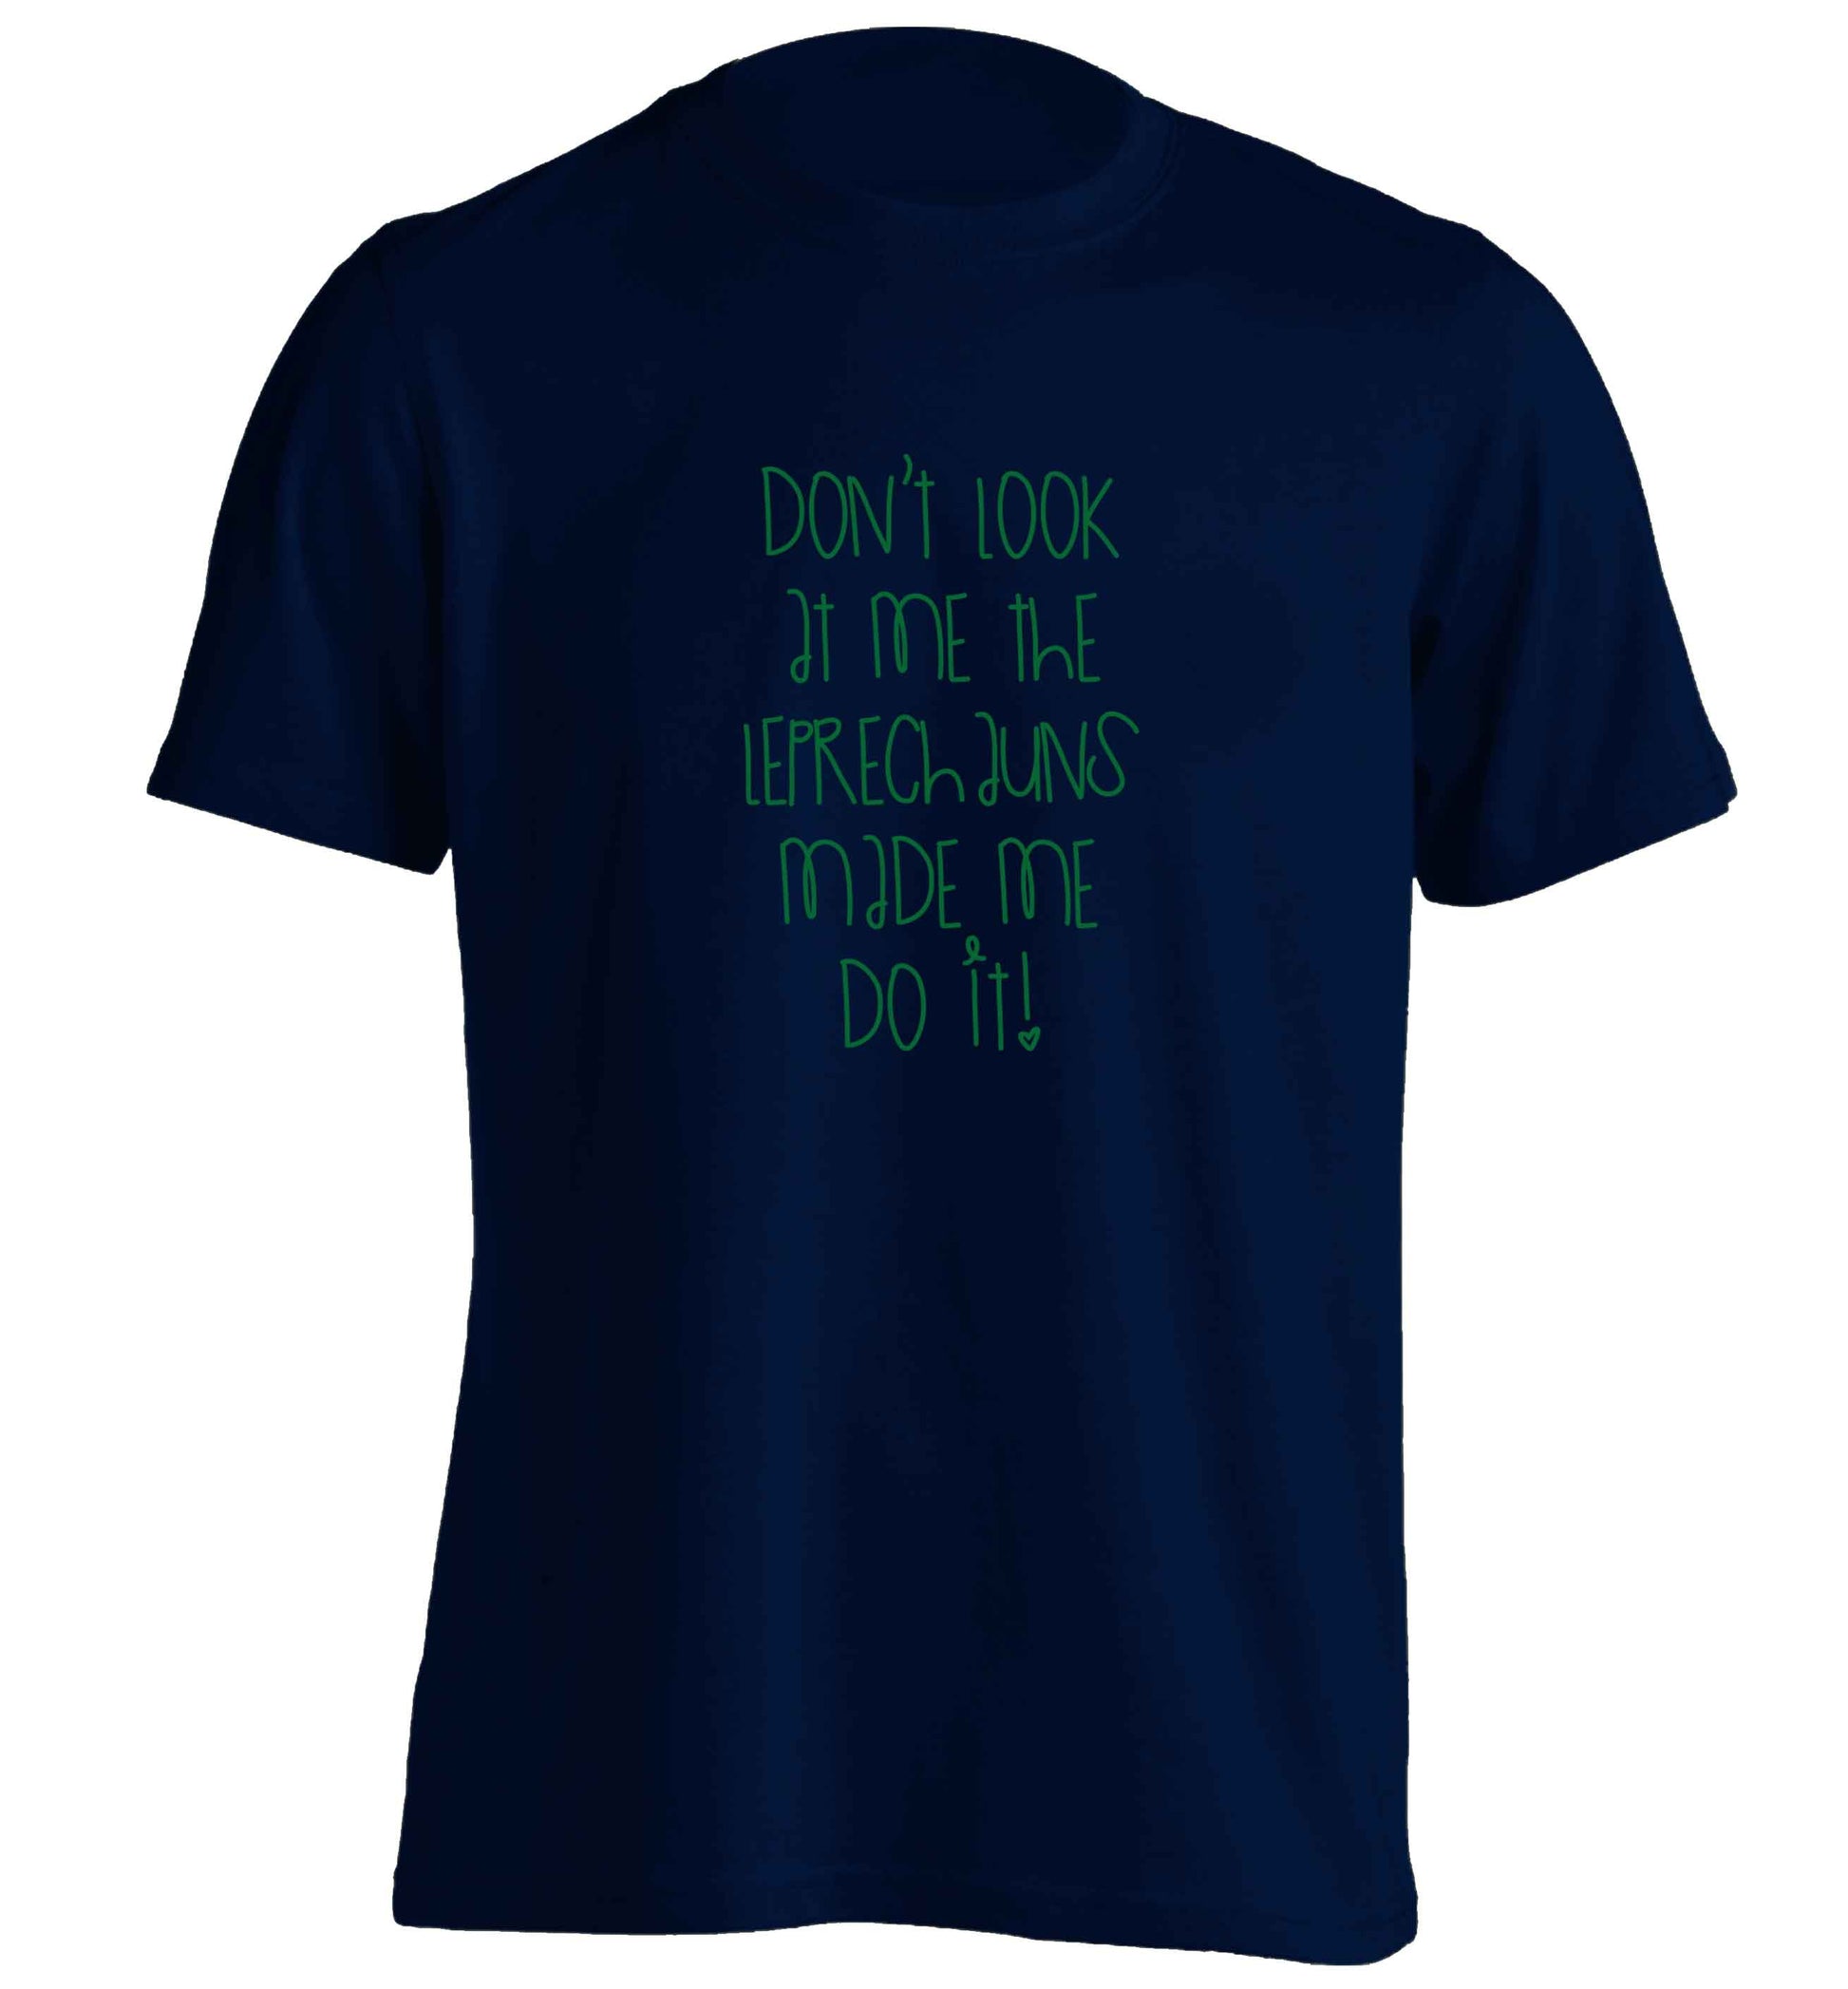 Don't look at me the leprechauns made me do it adults unisex navy Tshirt 2XL